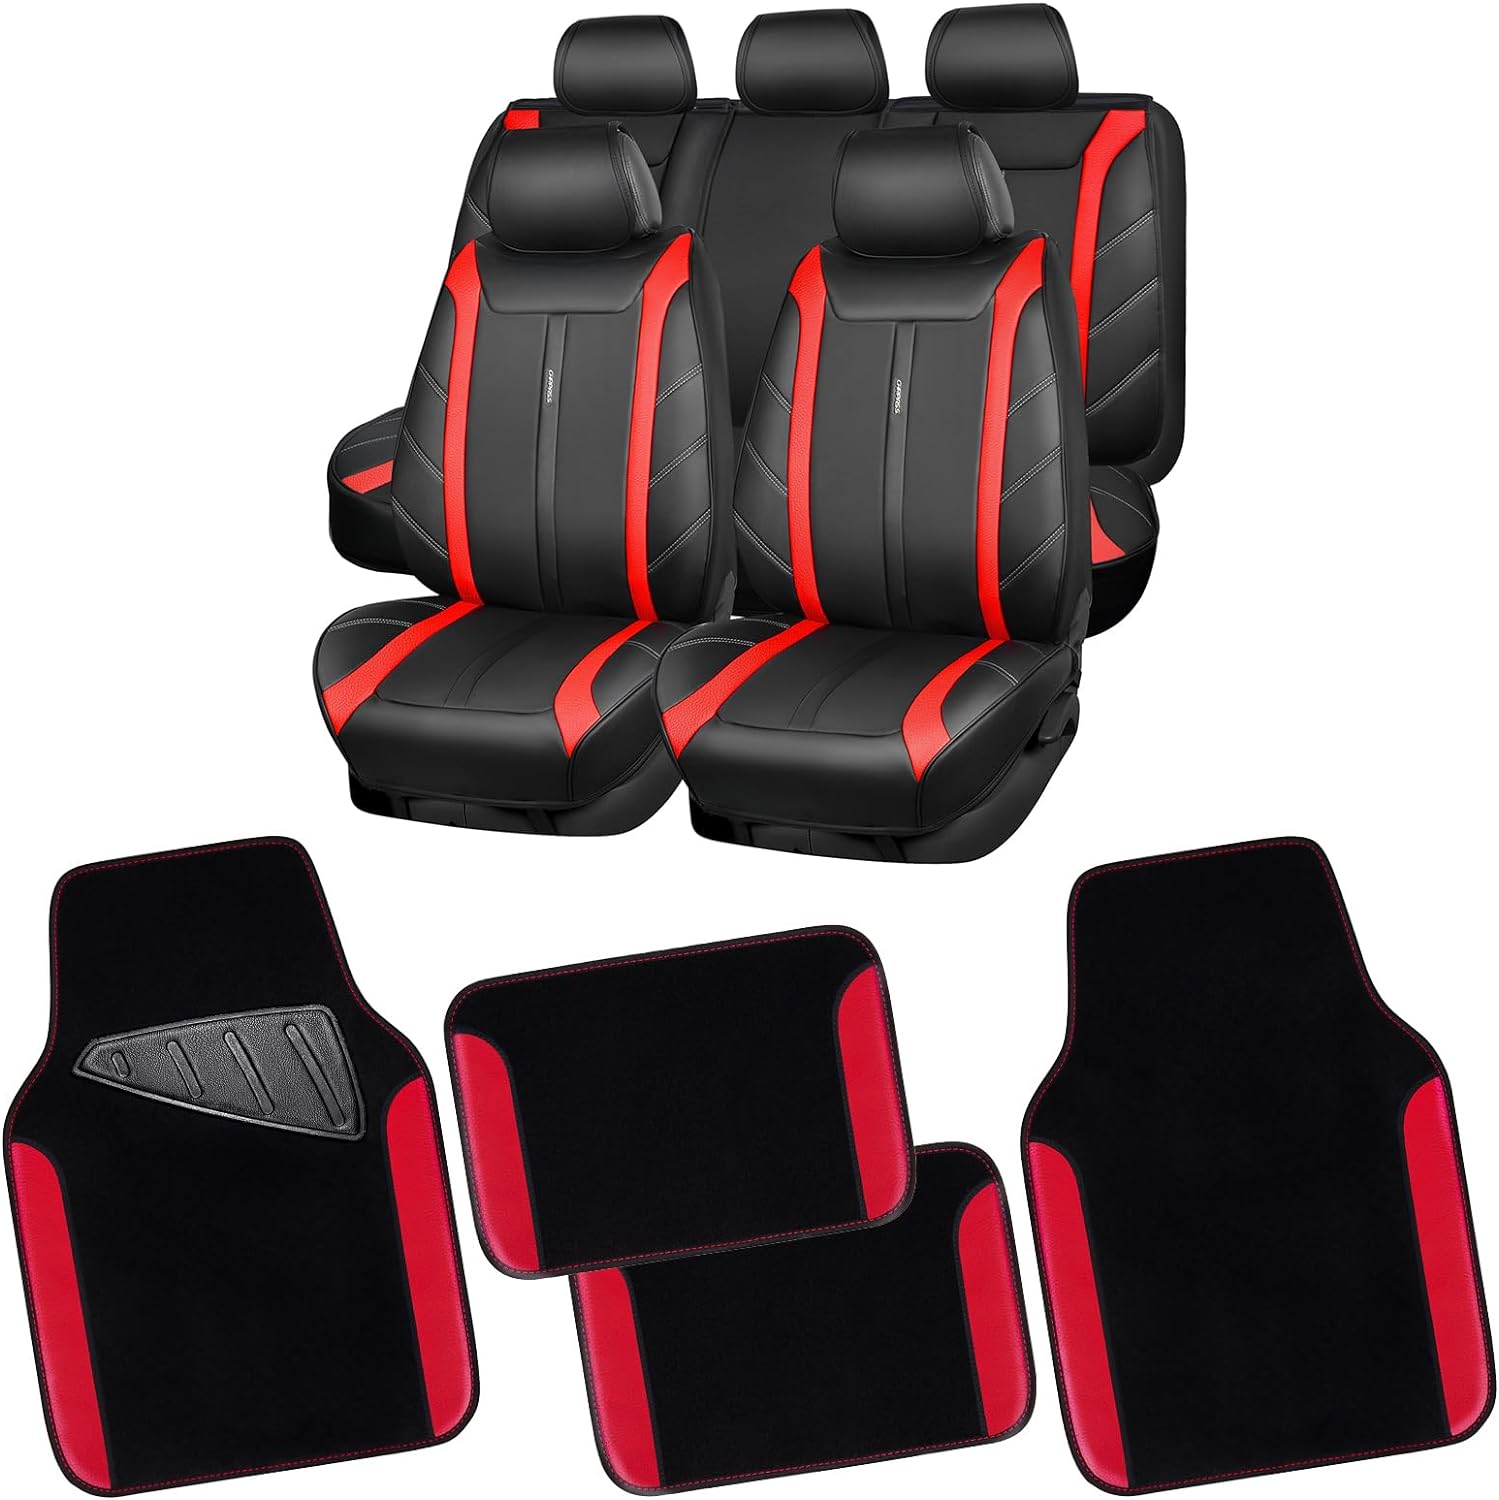 CAR PASS Leather Seat Covers Full Set All Coverage Cushioned. Waterproof Luxury Leatherette car seat Covers & Car Floor mats, Universal Fit for SUV, Cars, Van, Sporty (Black and Red)